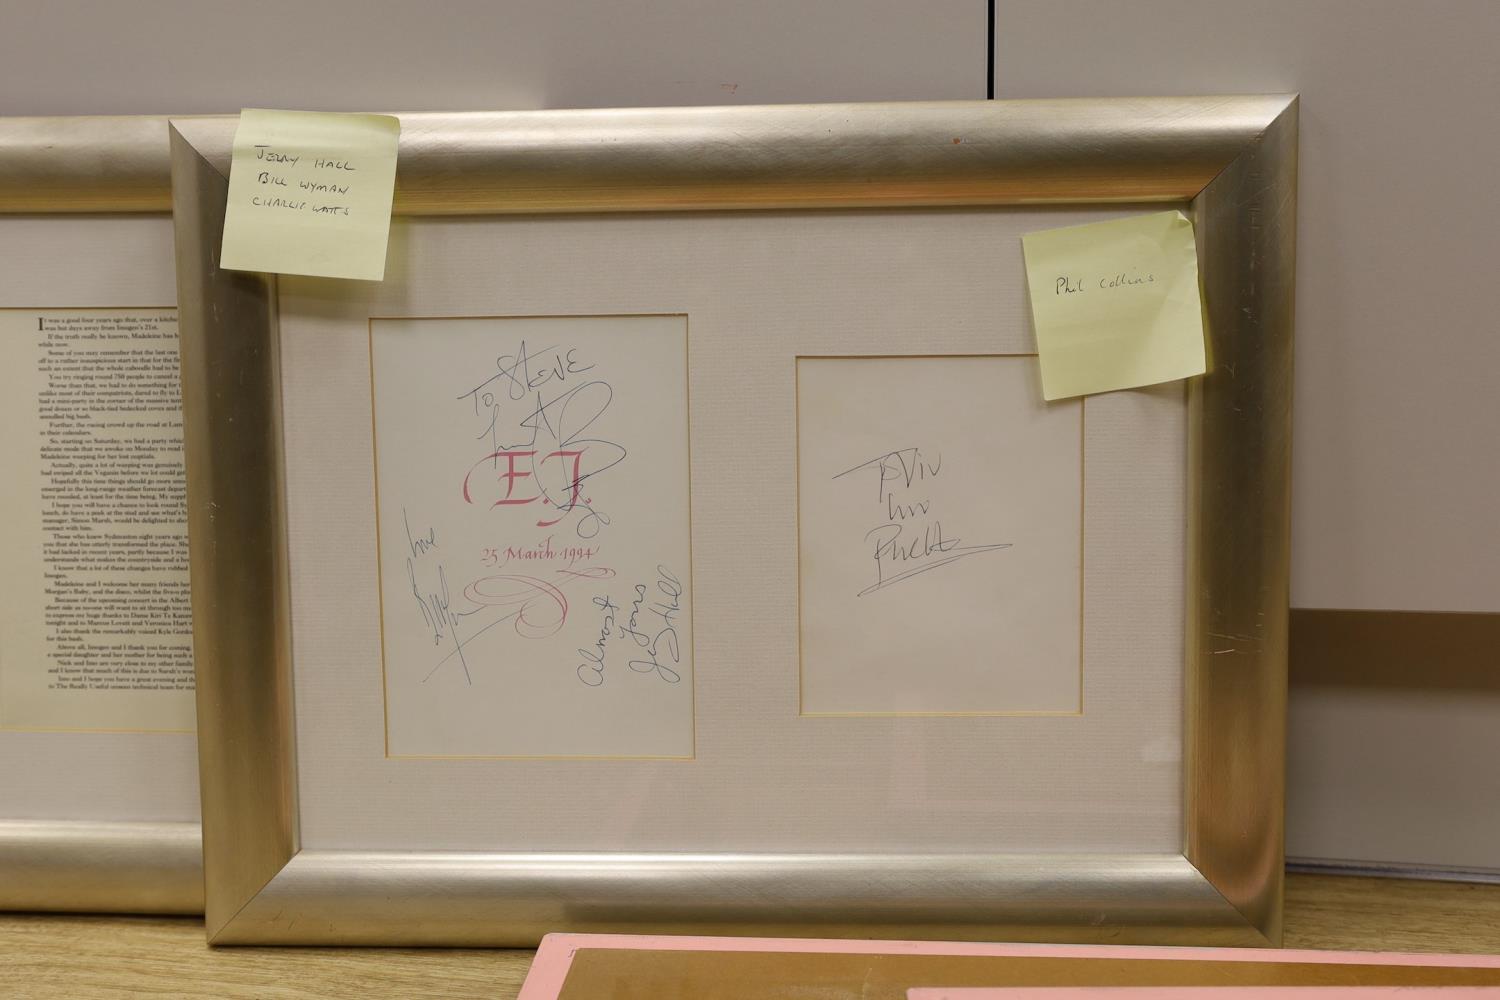 A collection of mostly framed autographs to include an event card from Elton John, 25 March 1994 - Image 4 of 6